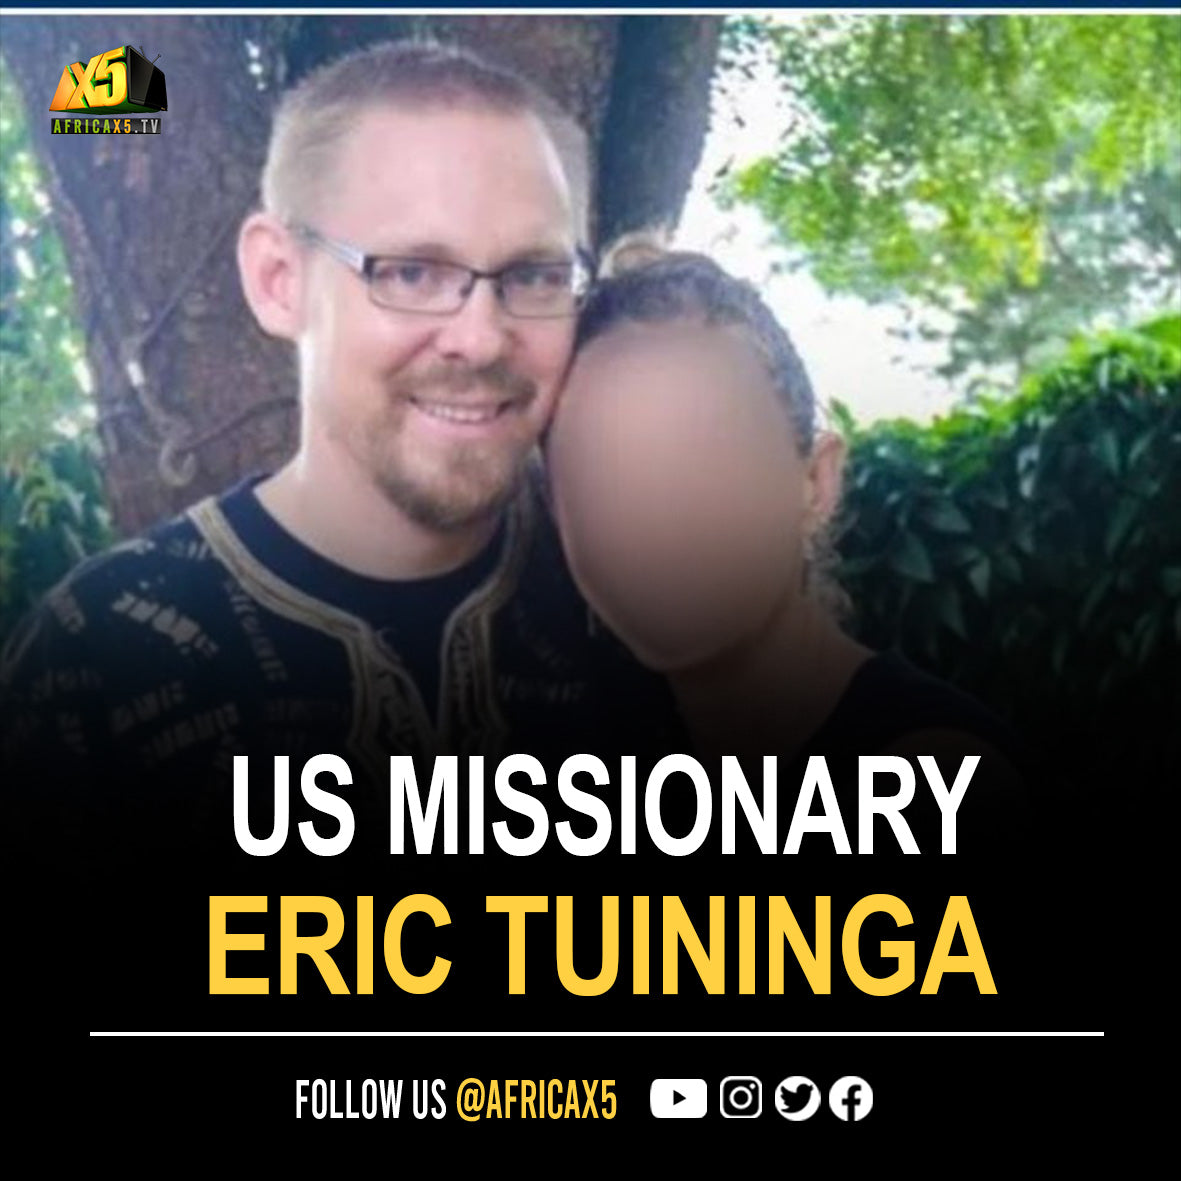 US missionary, Eric Tuininga is sentenced to 10 years after a US court found him guilty of defiling a 14 year old local girl under his care in Uganda’s eastern district of Mbale,